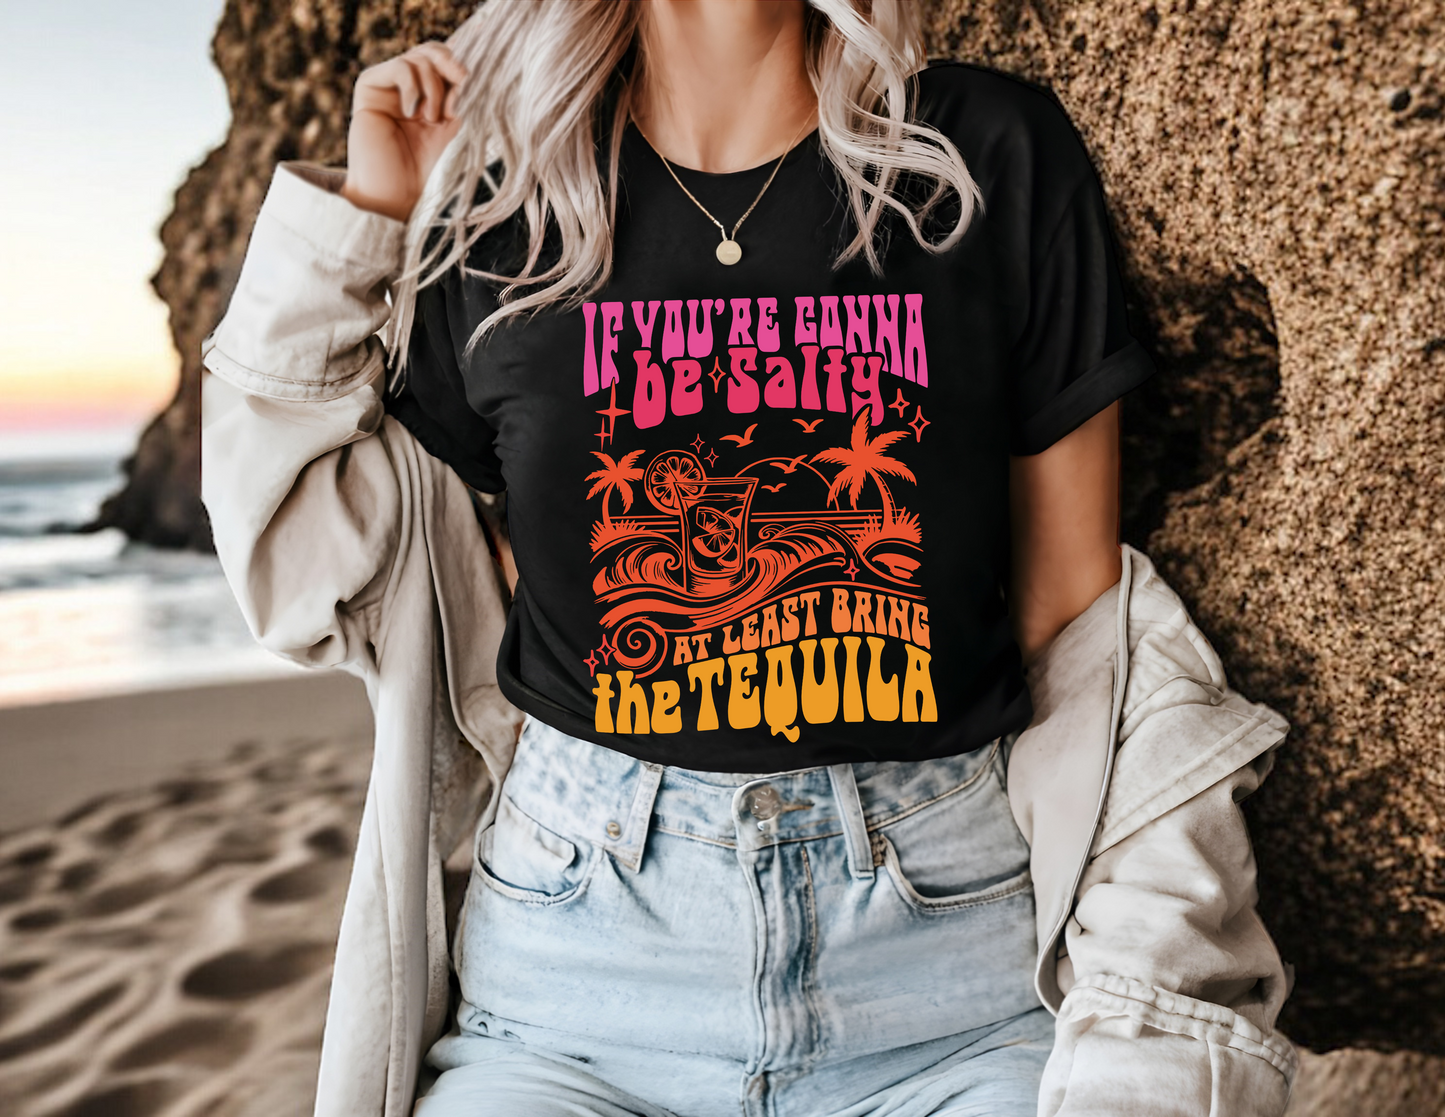 BRING THE TEQUILA tee